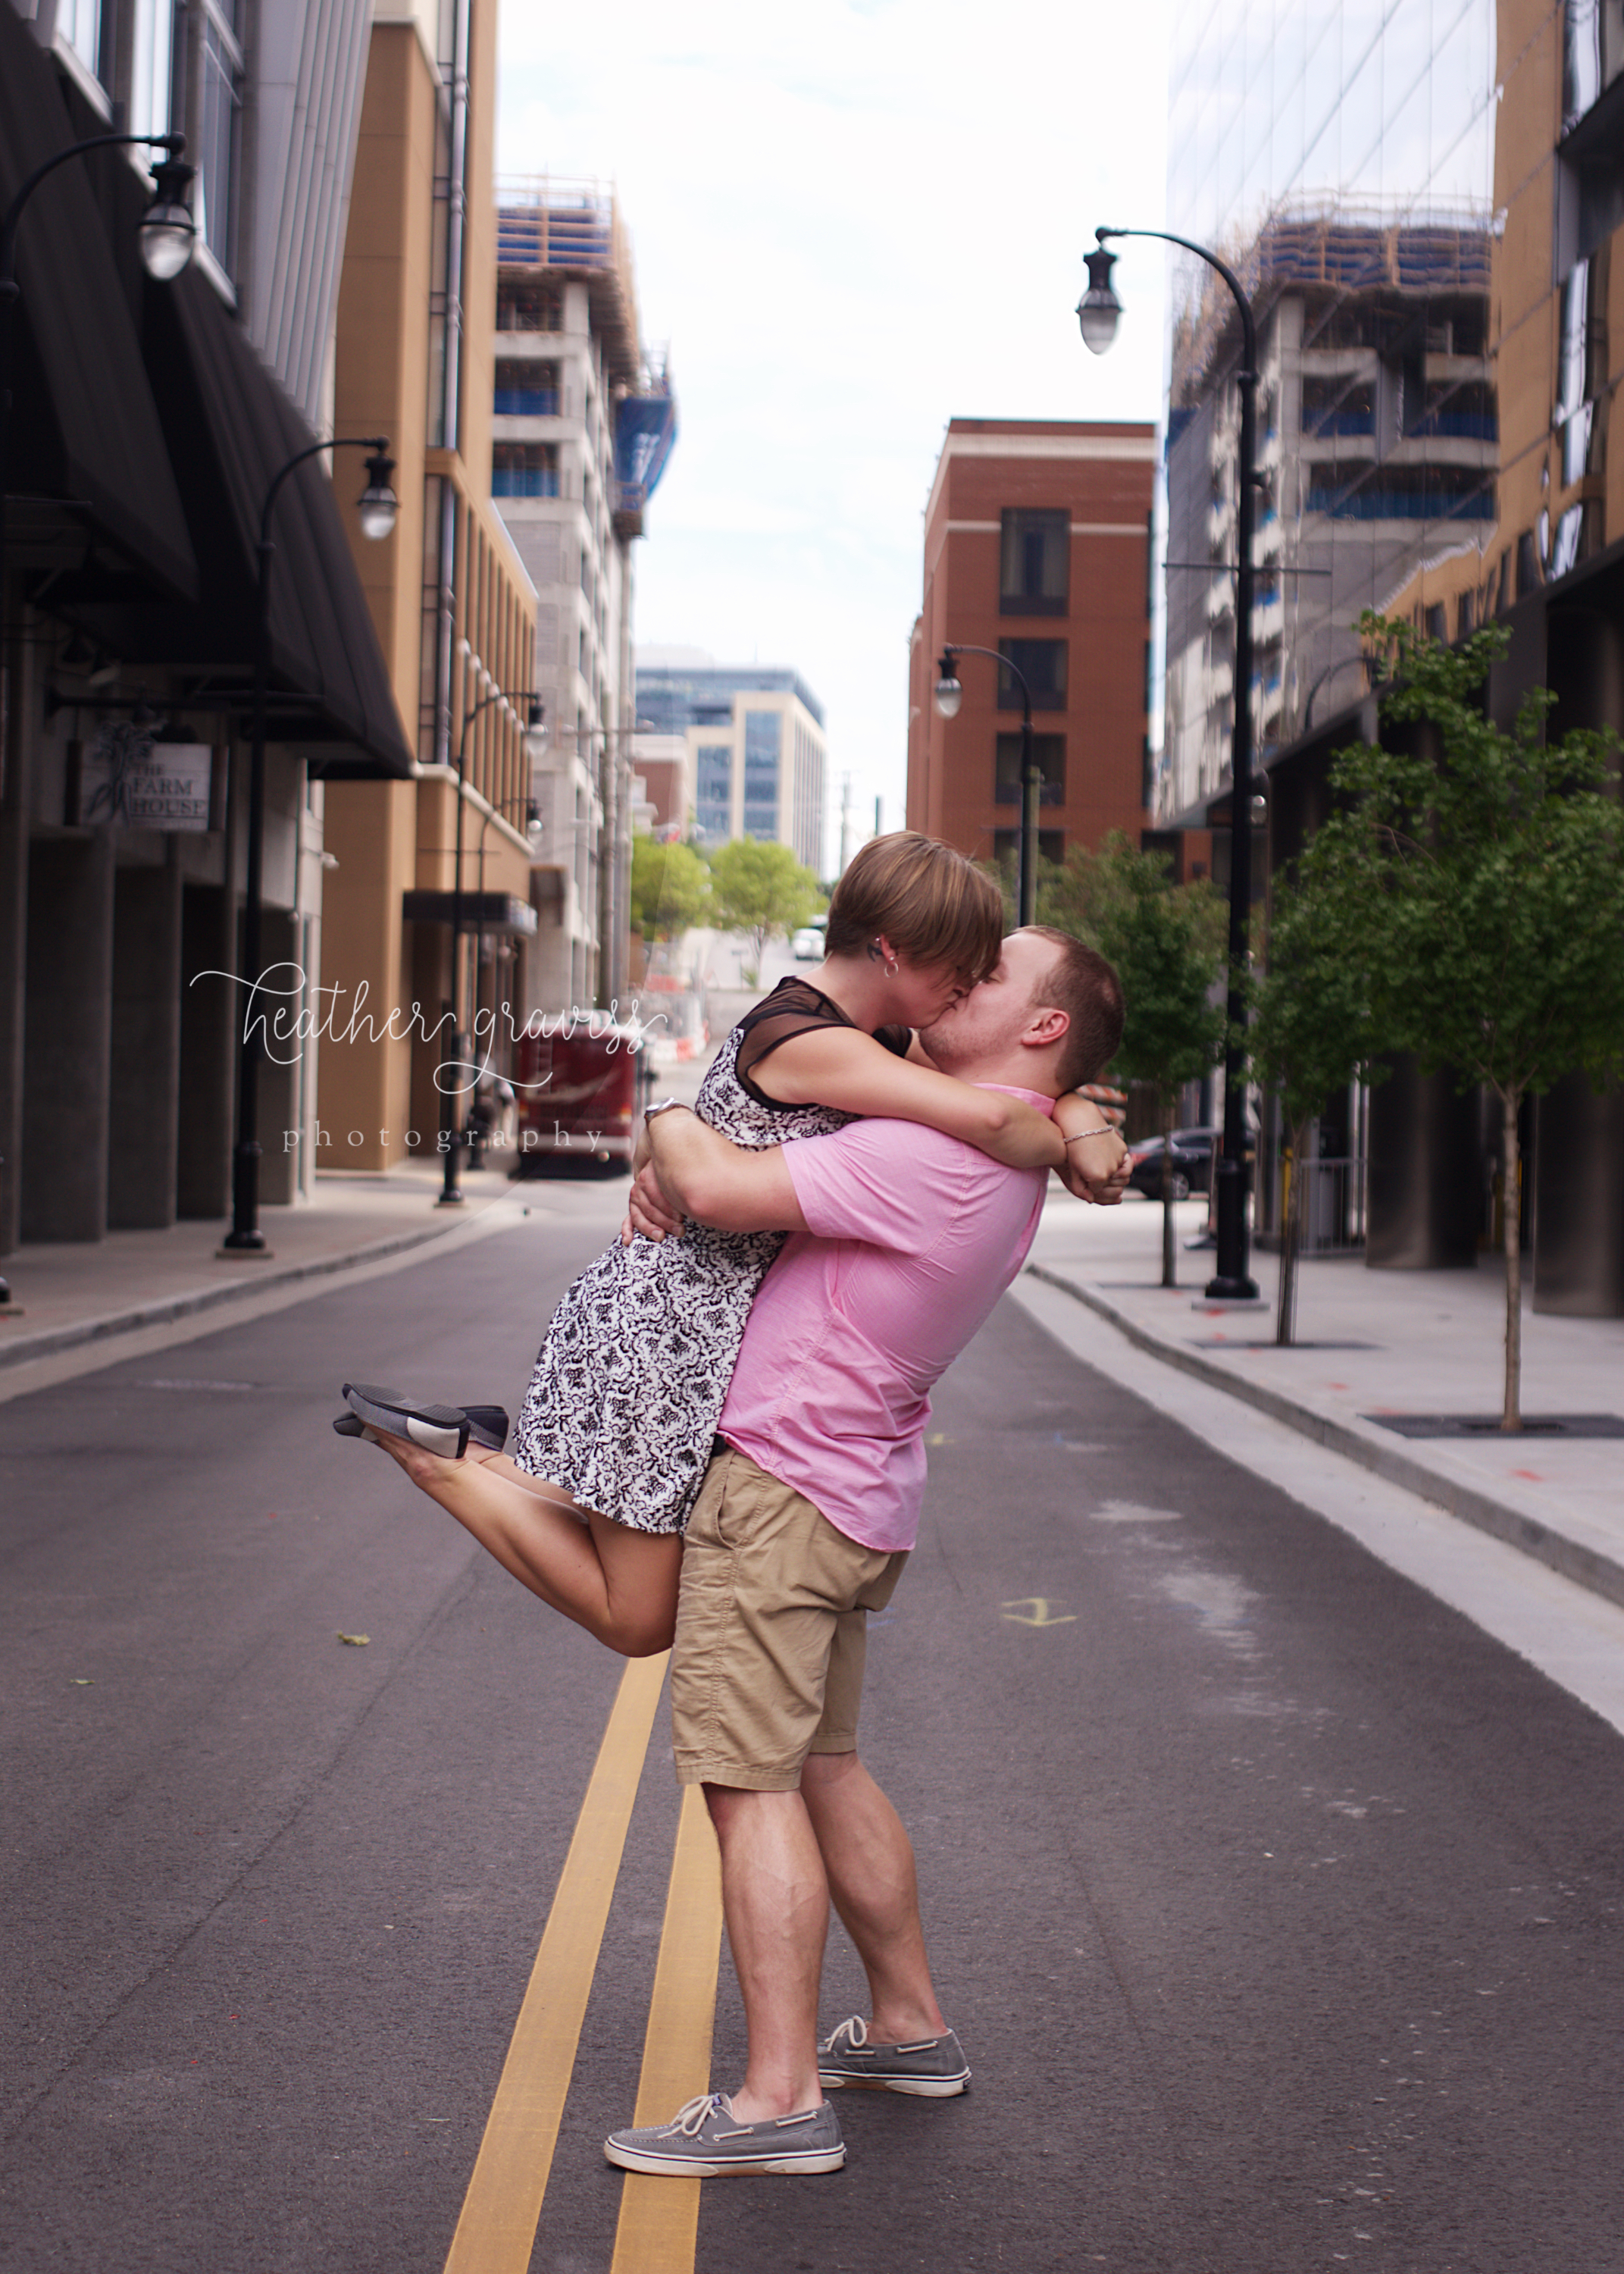 middle-of-the-street-kiss.jpg